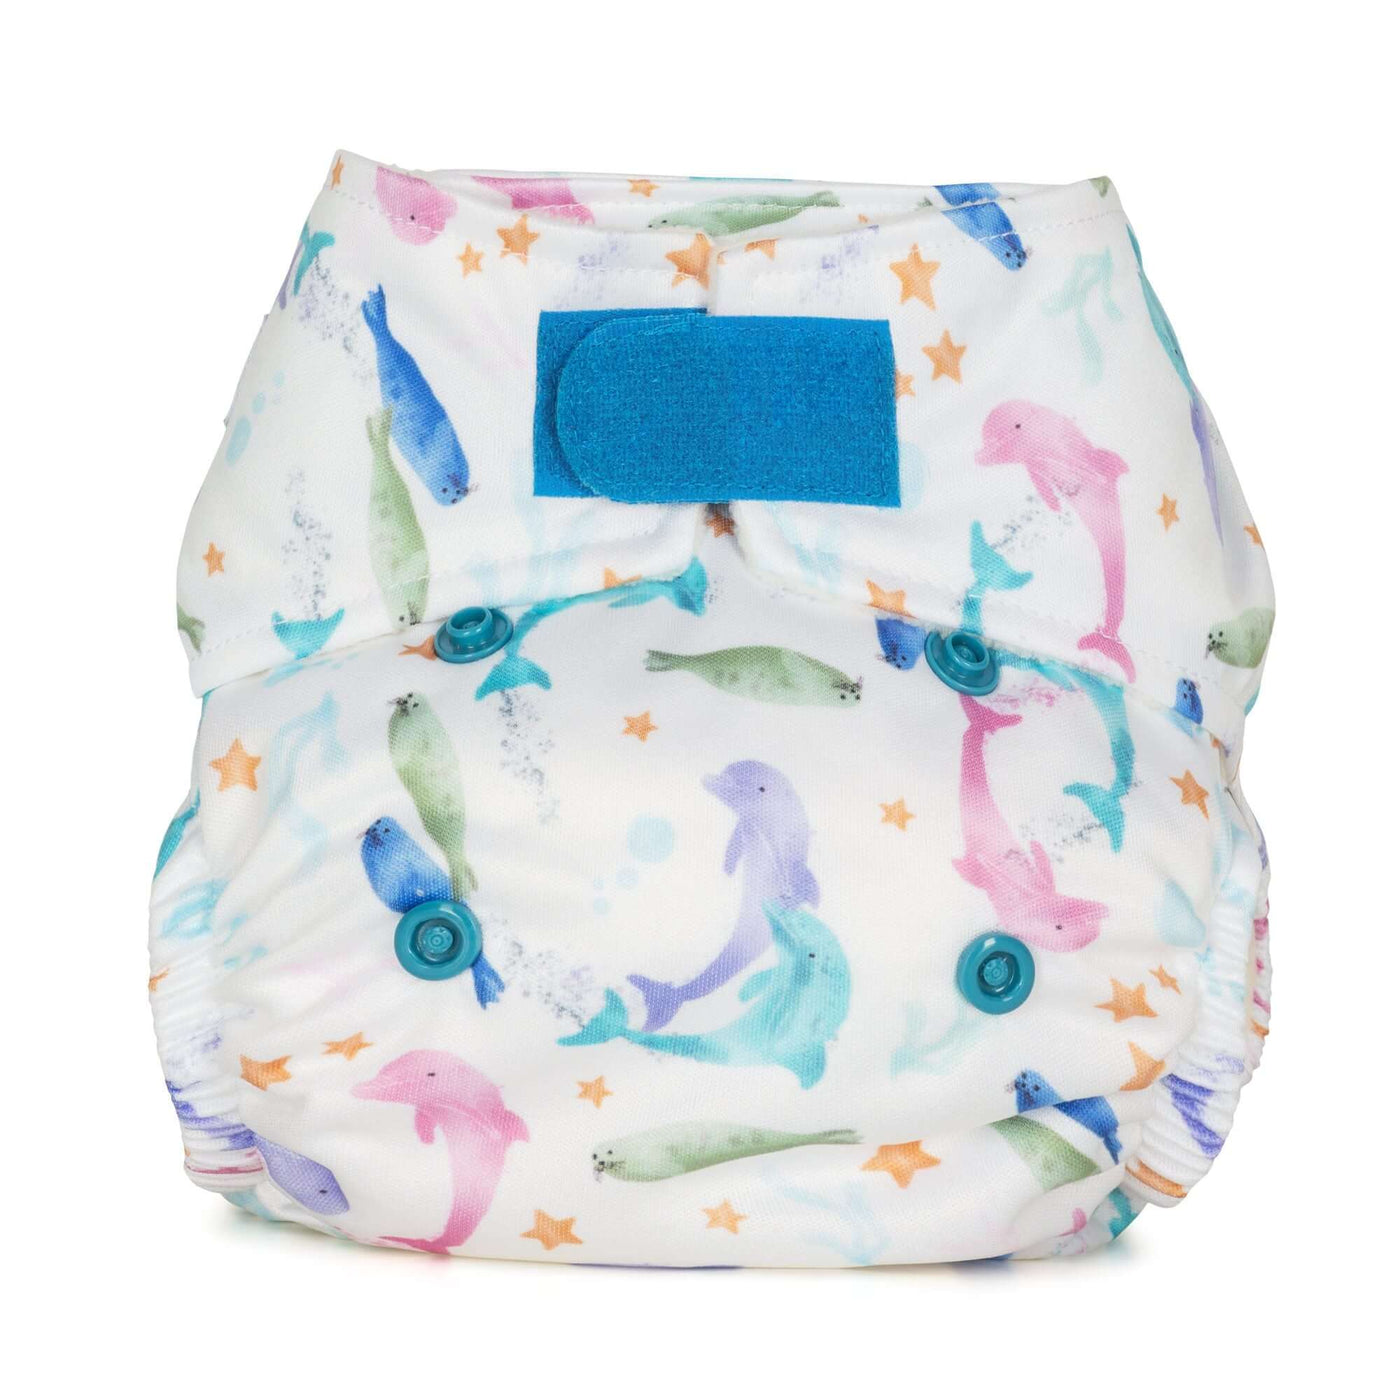 Baba + Boo Newborn Reusable Nappy - Prints Colour: Sea Life reusable nappies all in one nappies Earthlets